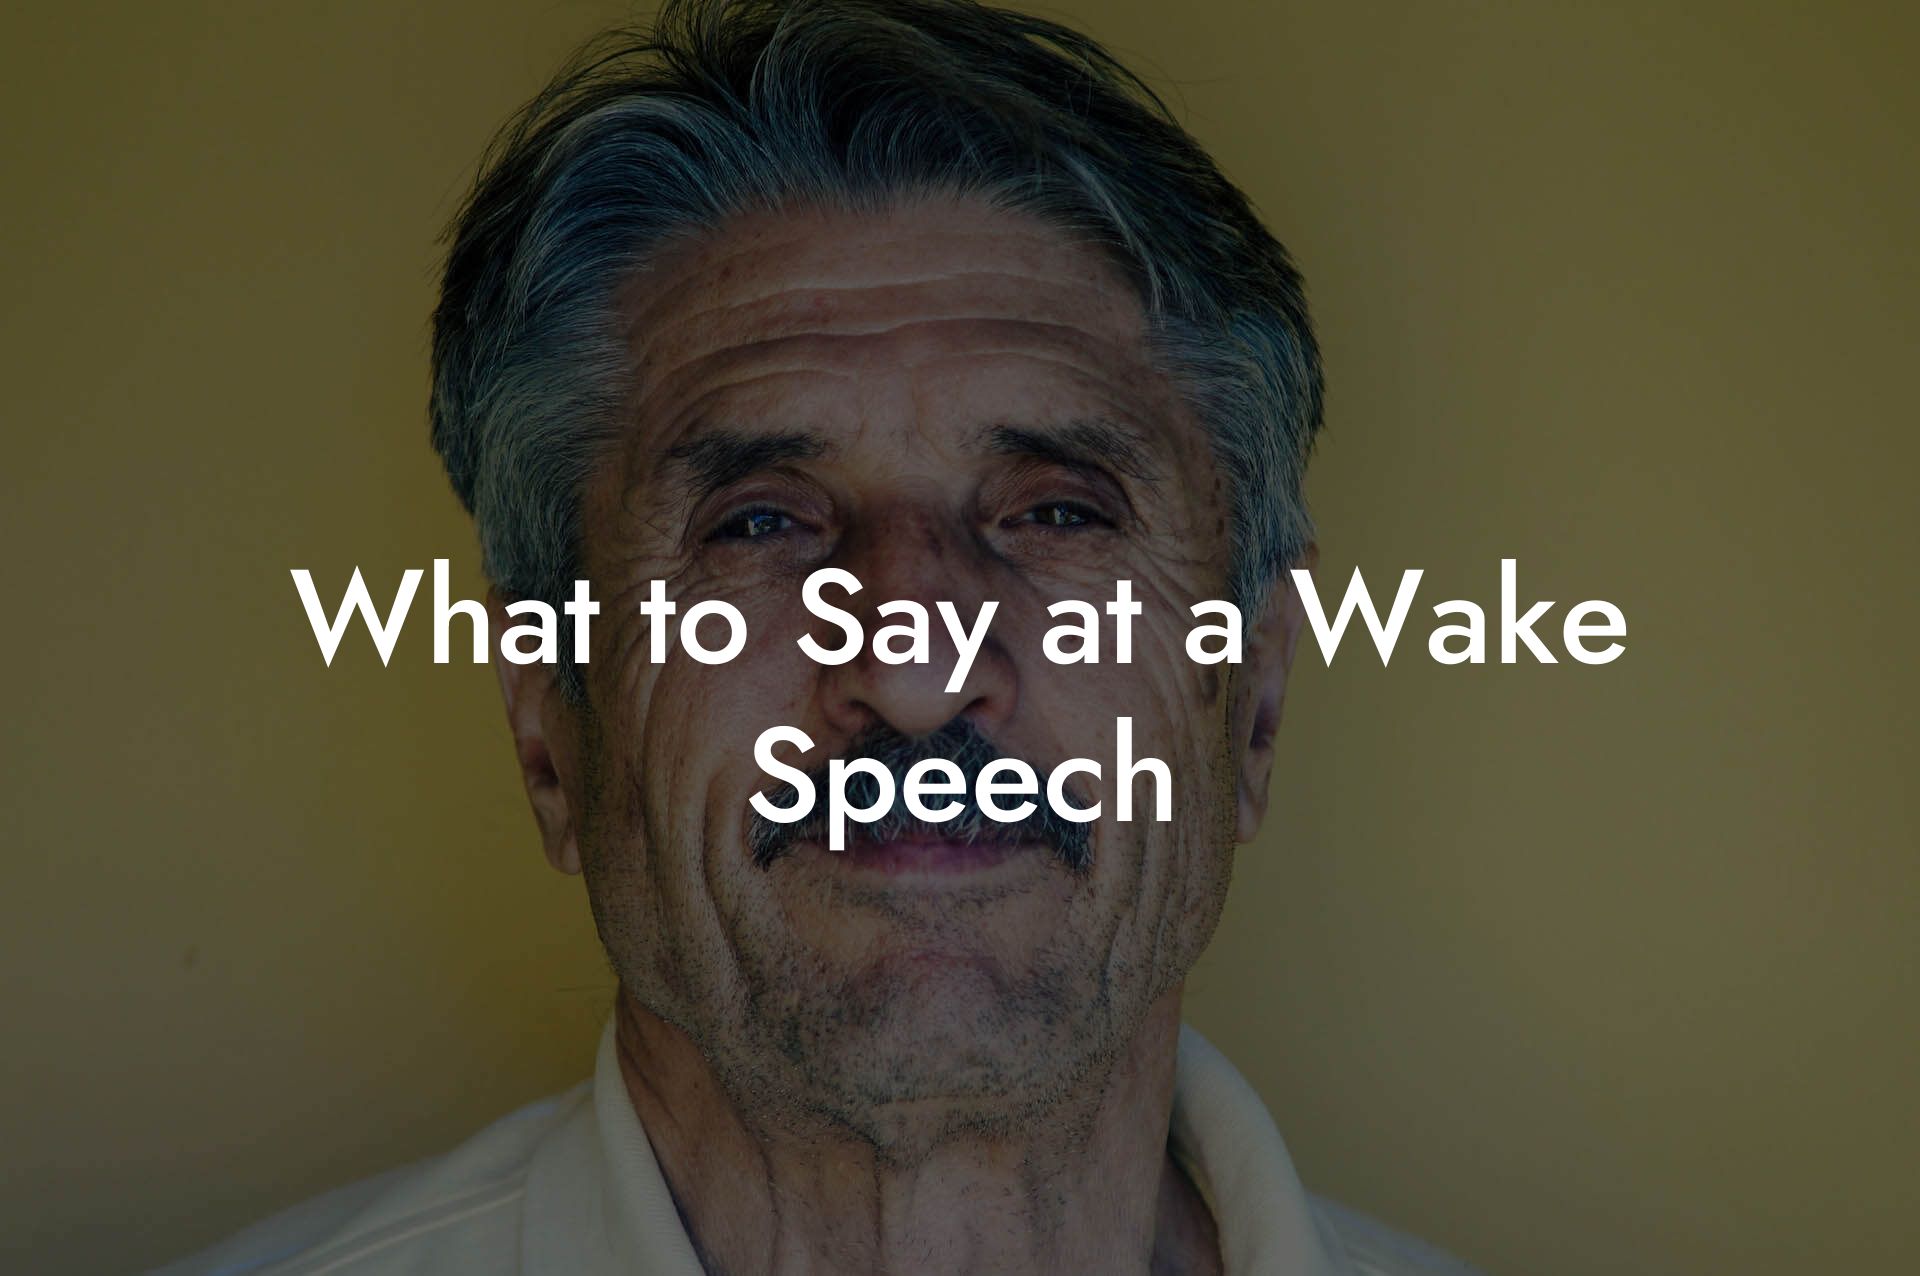 What to Say at a Wake Speech